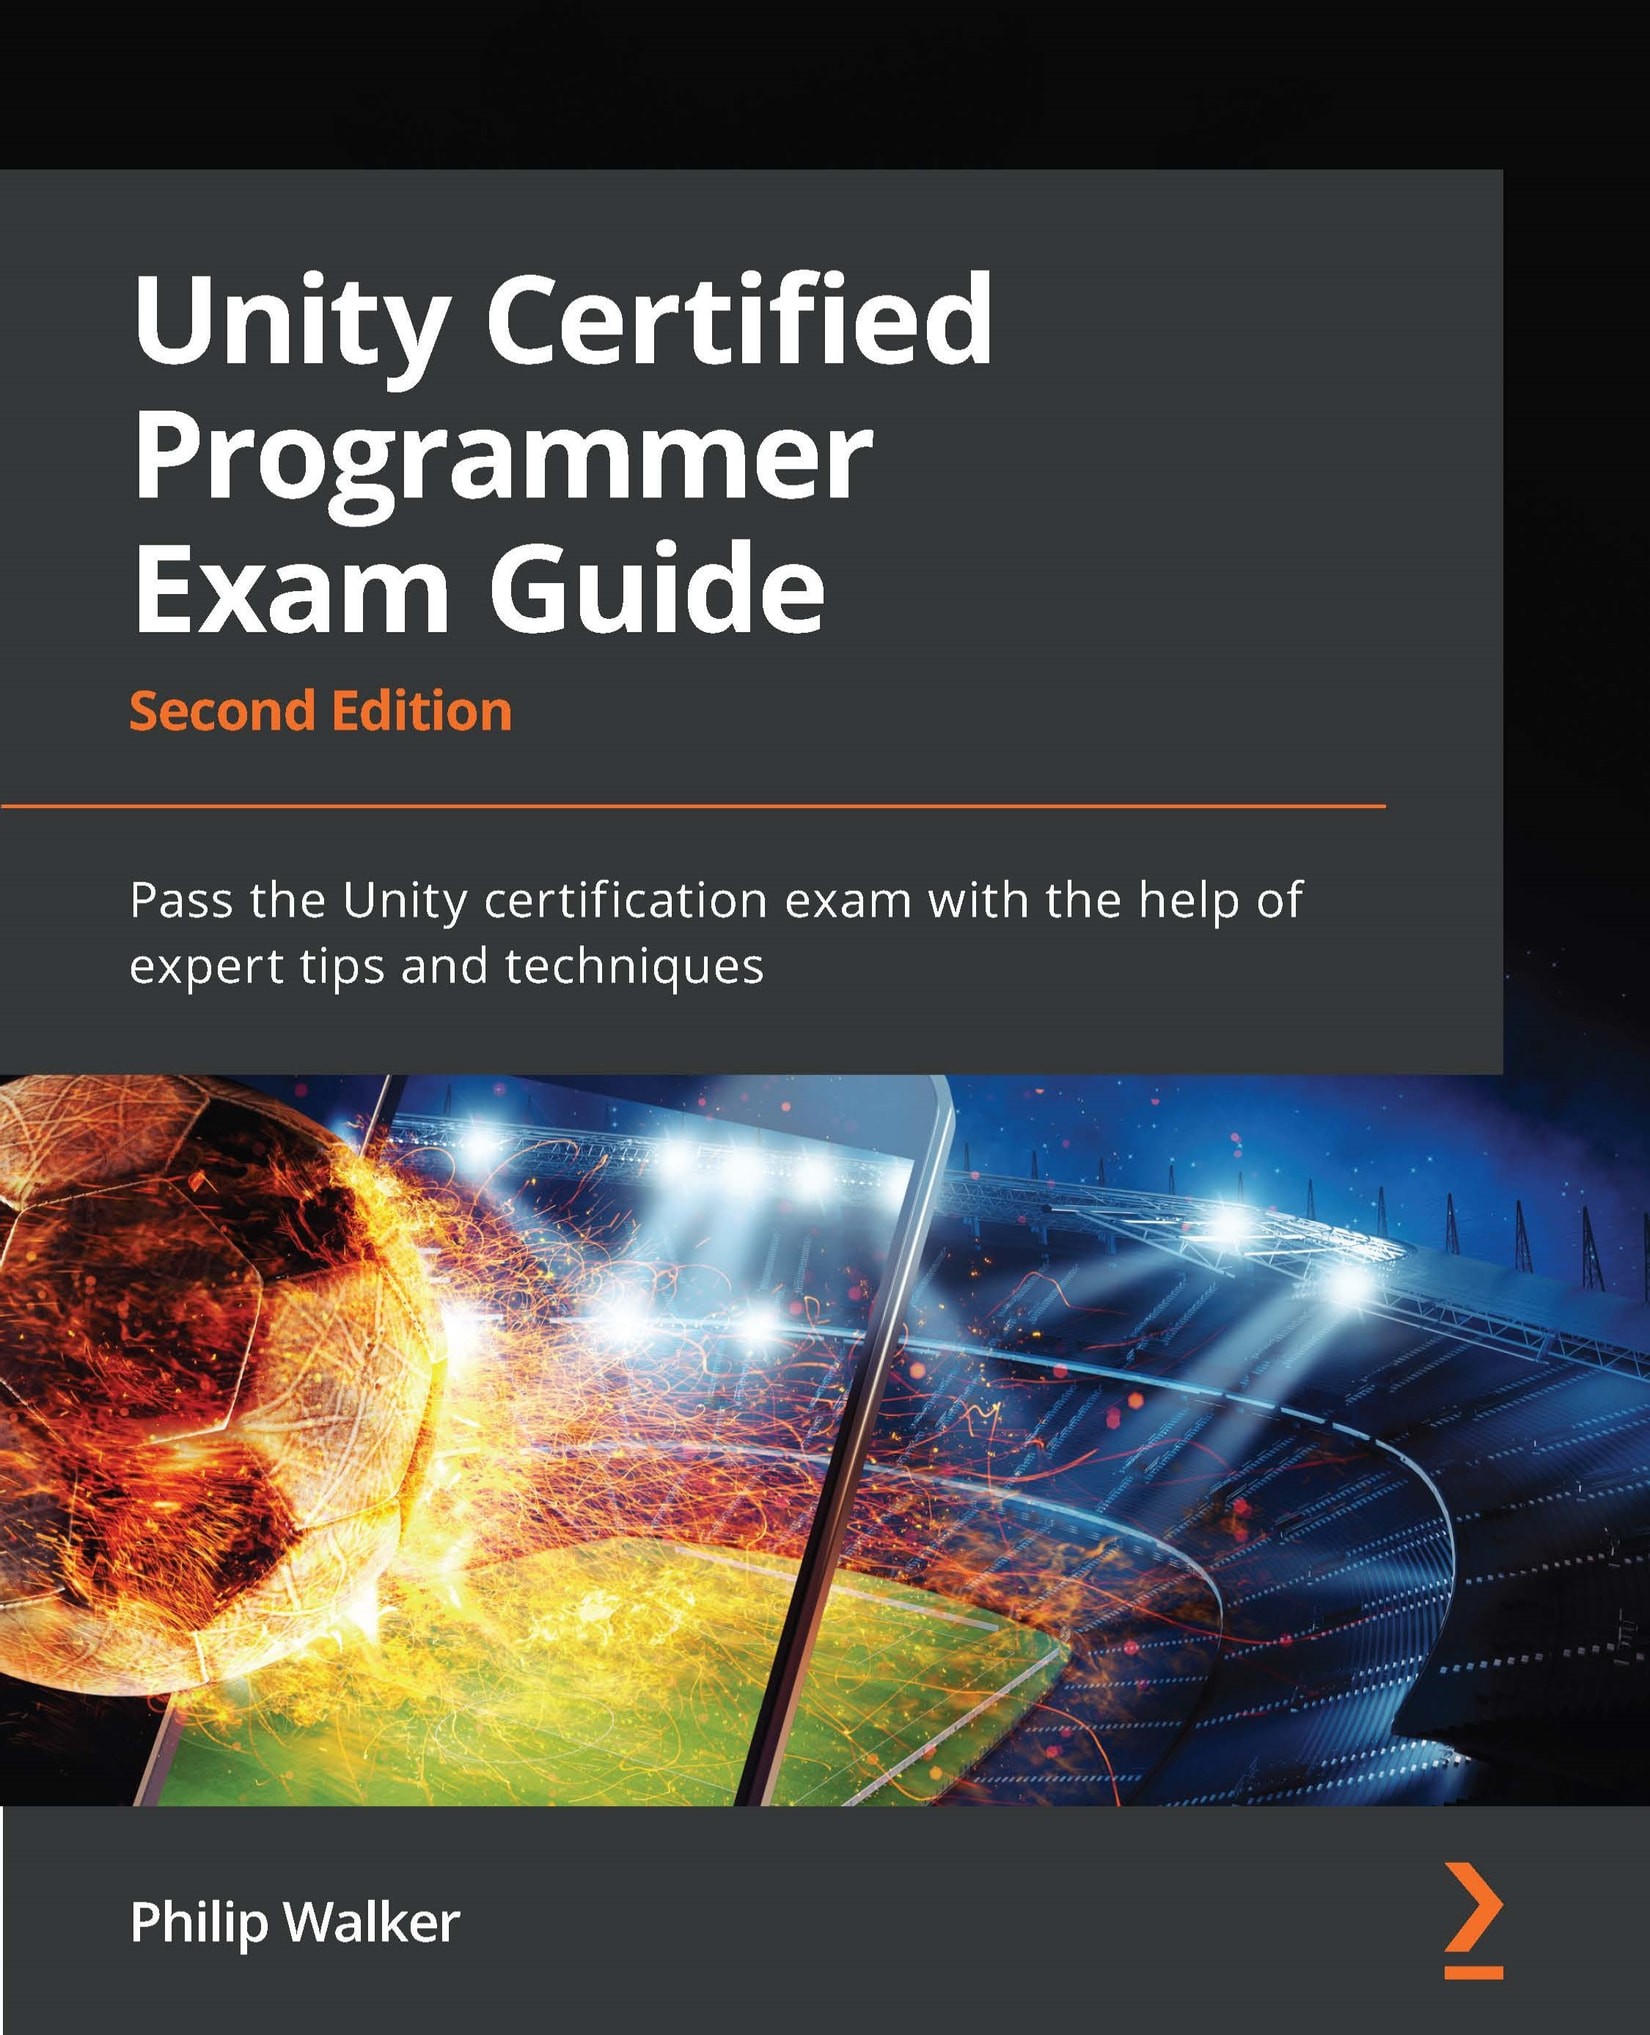 Unity Certified Programmer Exam Guide - Second Edition: Pass the Unity Certification Exam with the Help of Expert Tips and Techniques